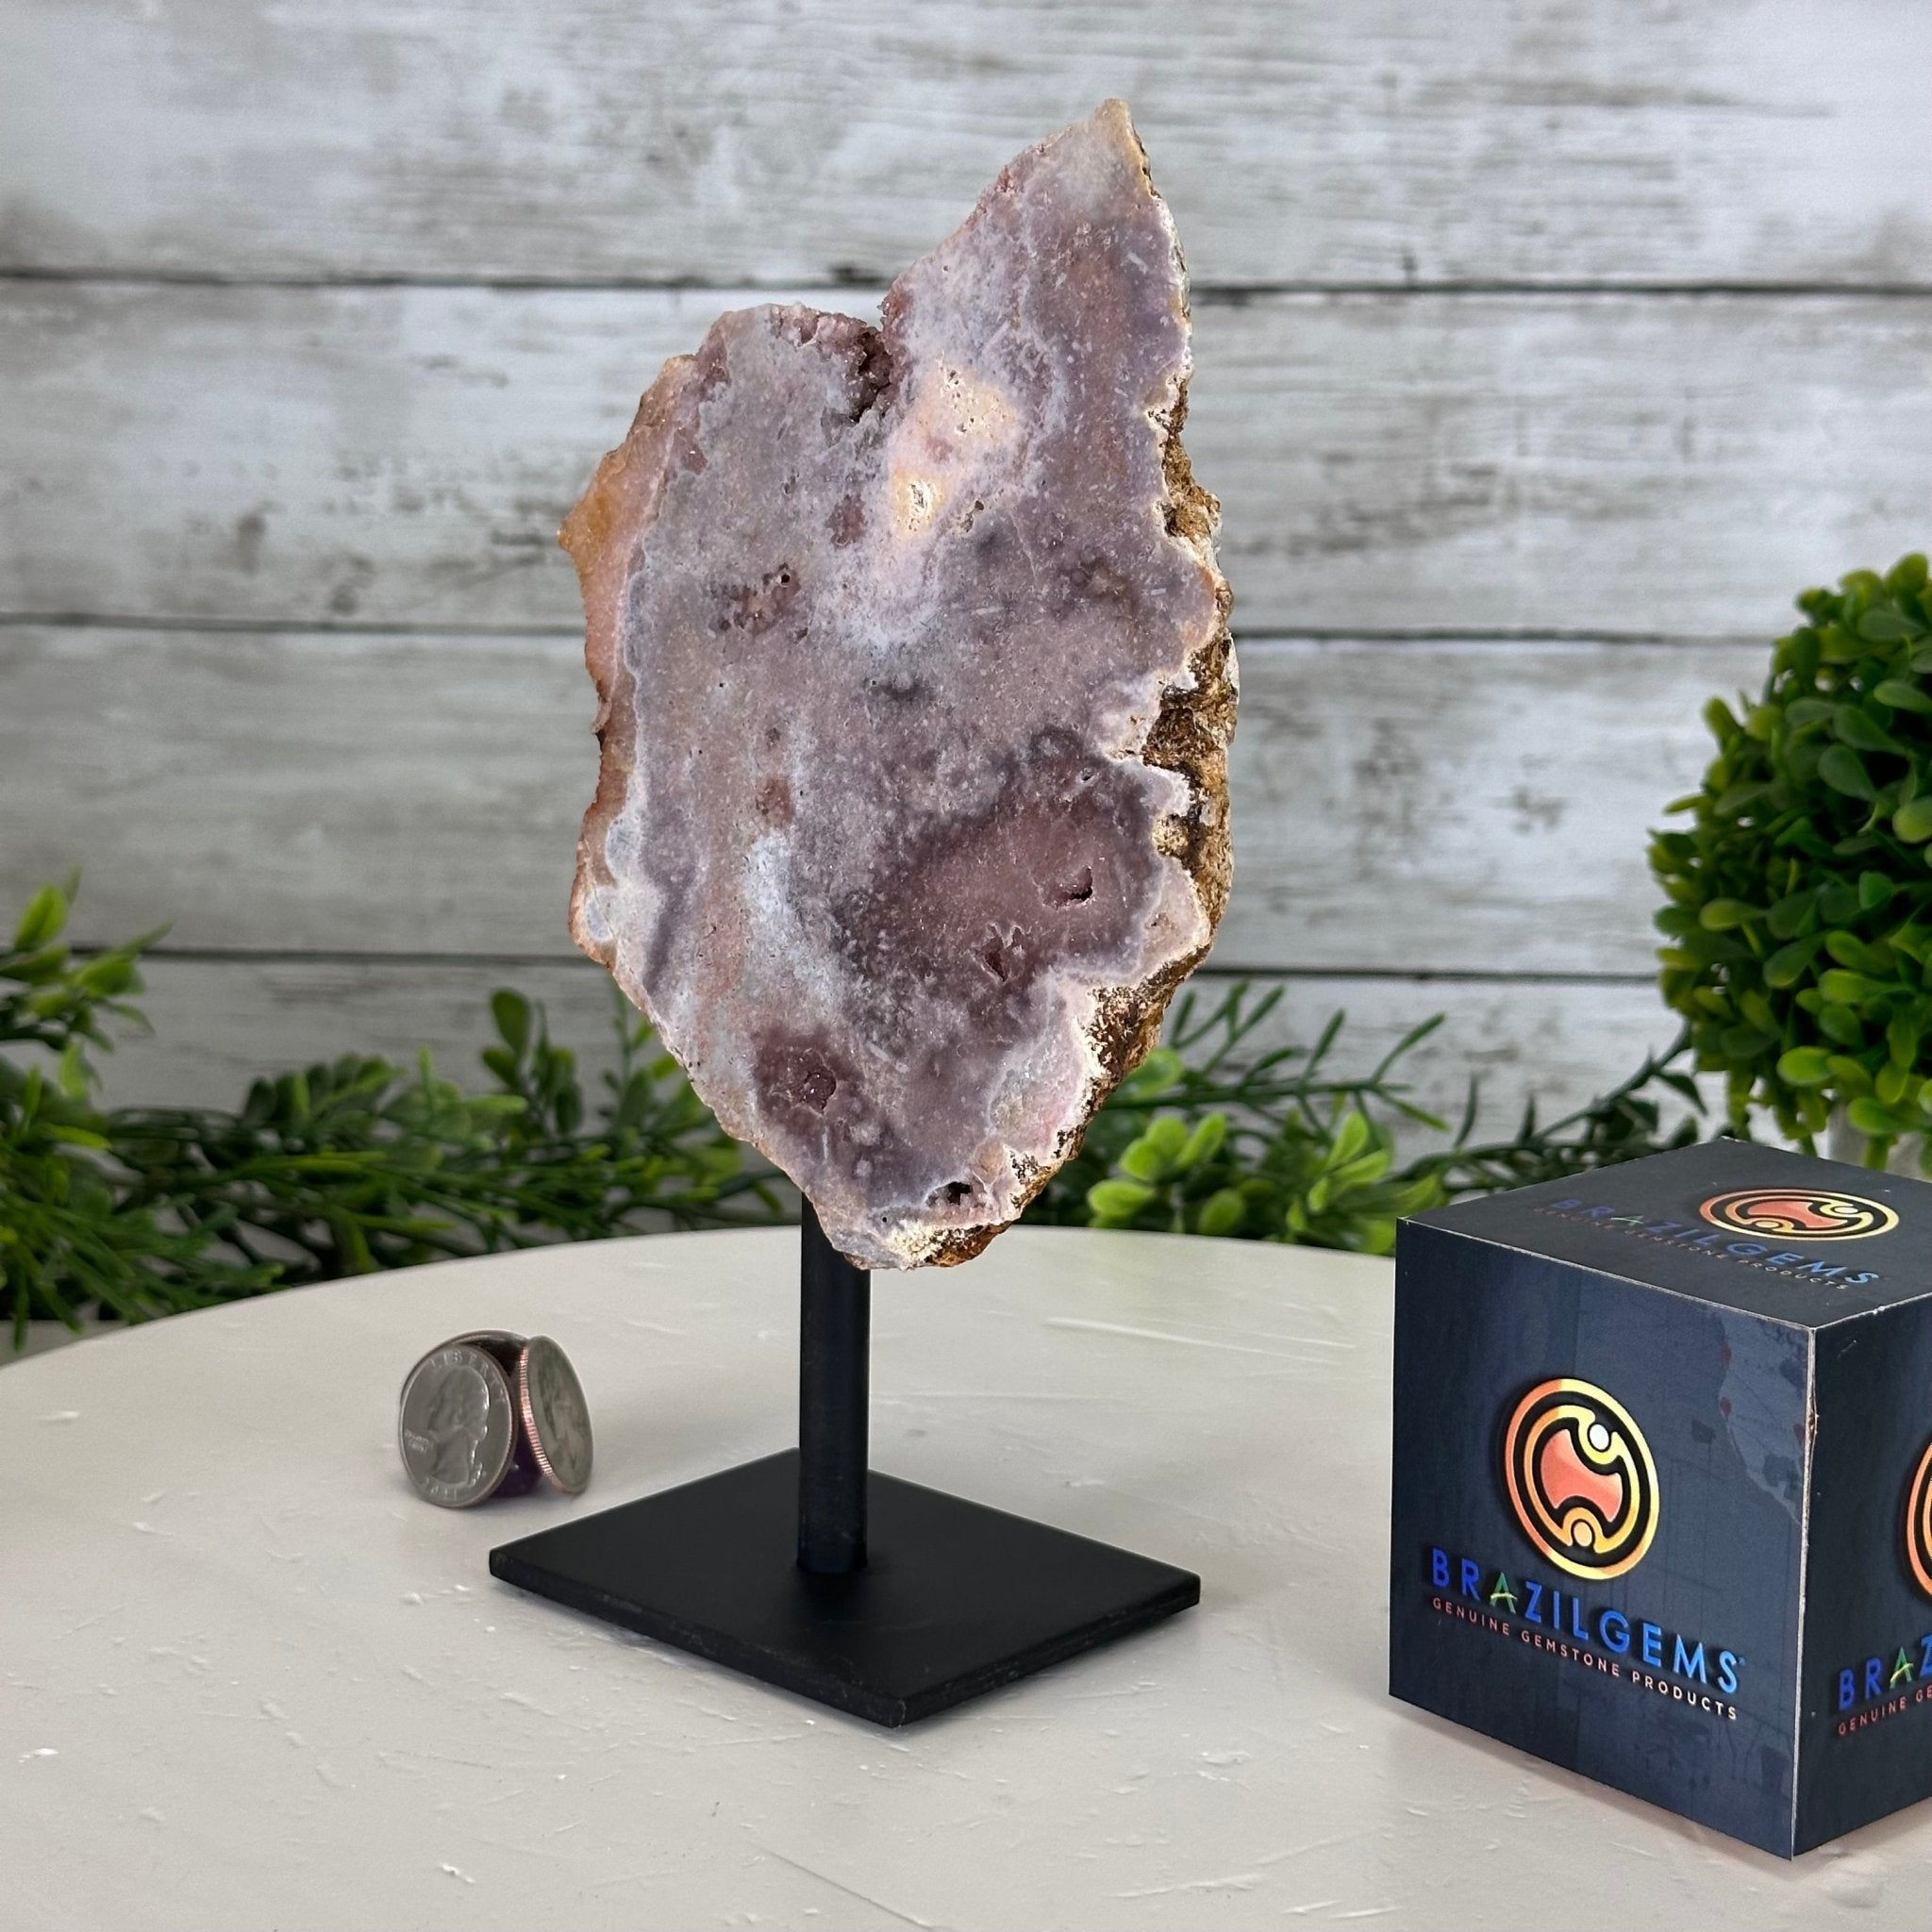 Pink Amethyst Slice on a Stand, 2.4 lbs and 8.1" Tall #5742-0132 - Brazil GemsBrazil GemsPink Amethyst Slice on a Stand, 2.4 lbs and 8.1" Tall #5742-0132Slices on Fixed Bases5742-0132